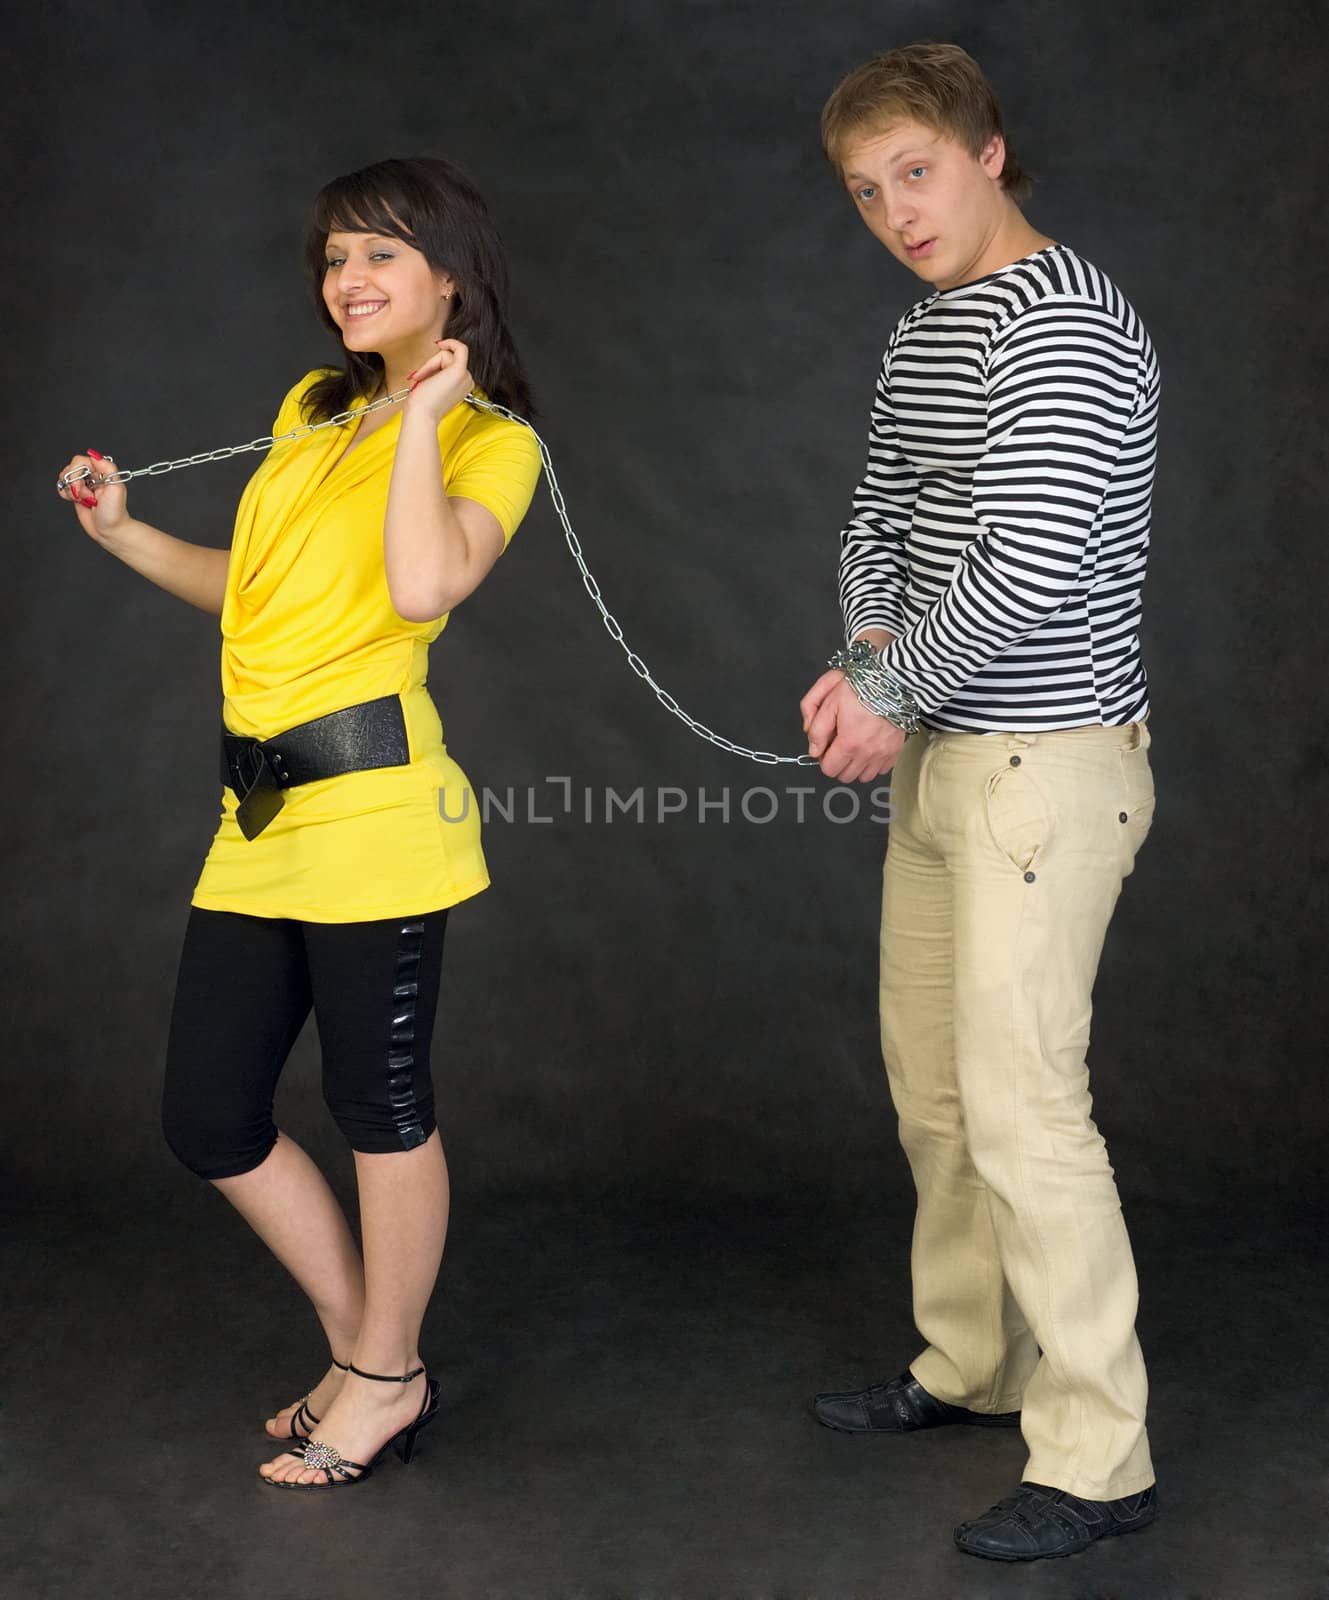 Lady guide shackled young man by pzaxe